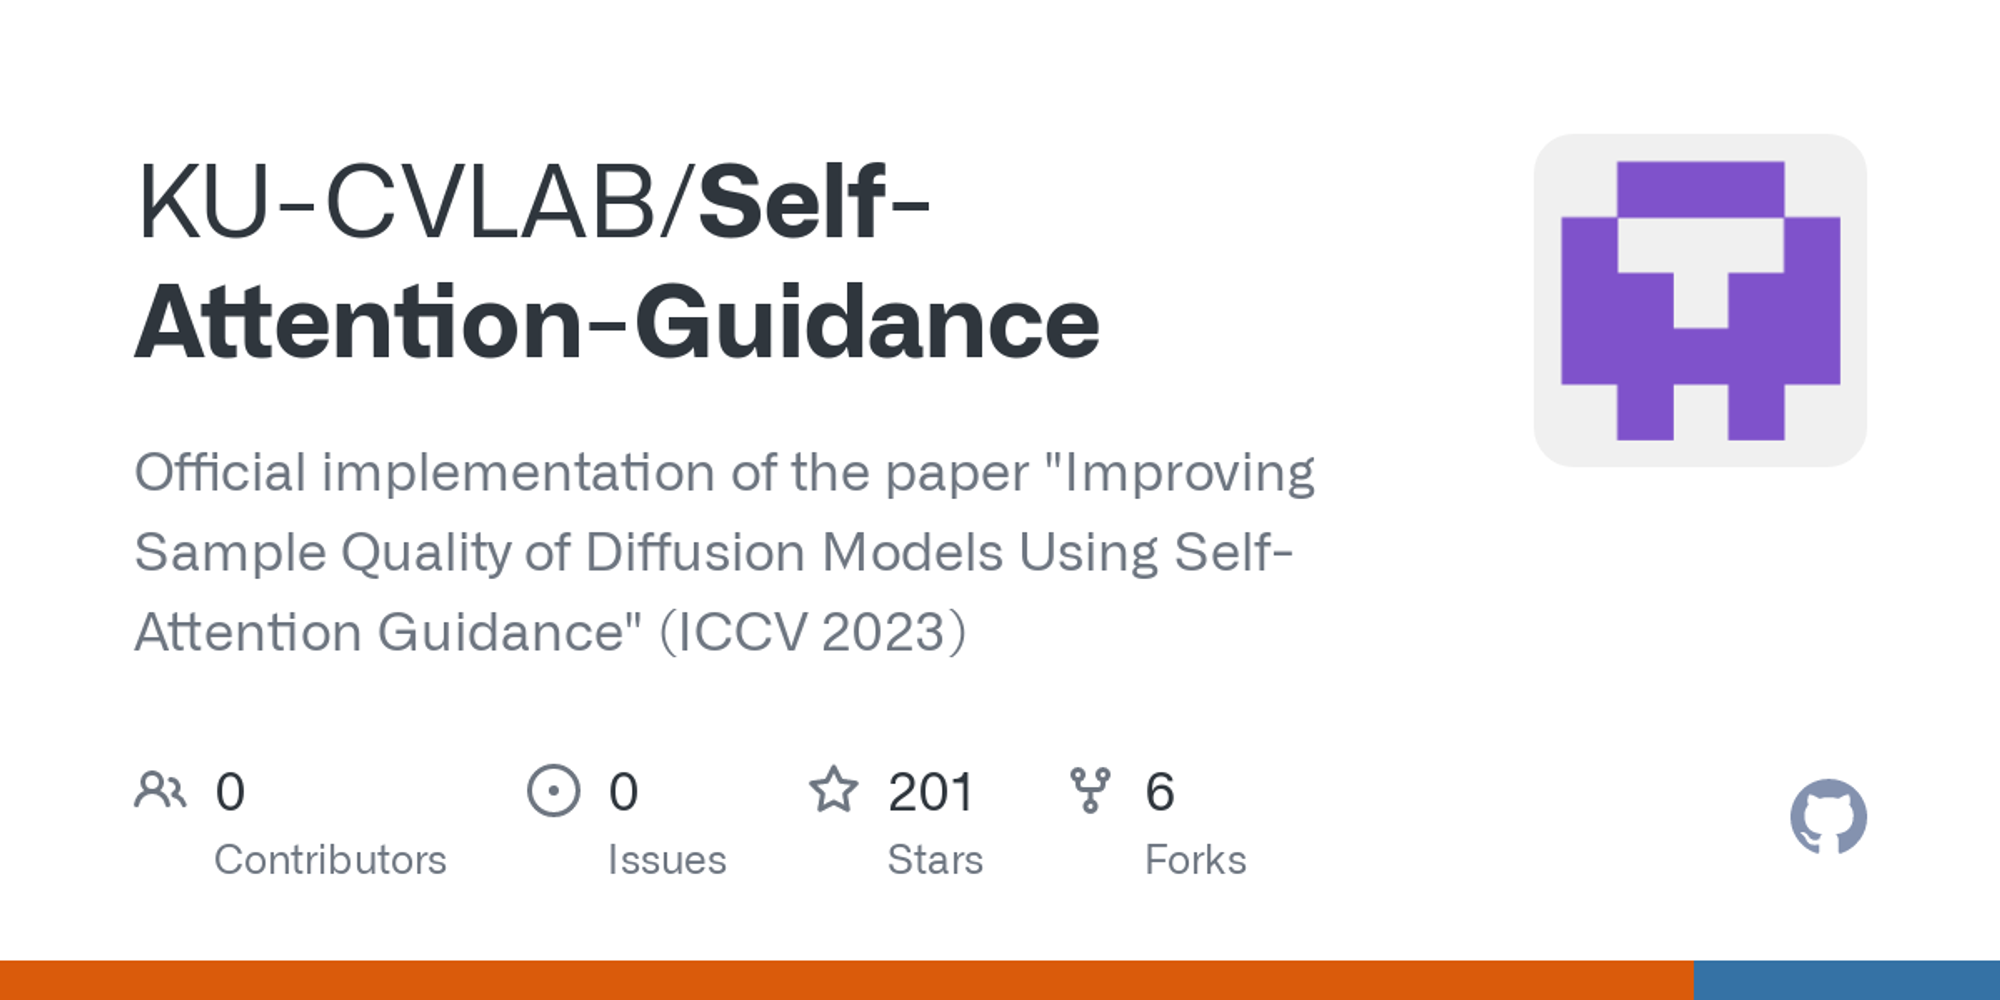 GitHub - KU-CVLAB/Self-Attention-Guidance: Official implementation of the paper "Improving Sample Quality of Diffusion Models Using Self-Attention Guidance" (ICCV 2023)